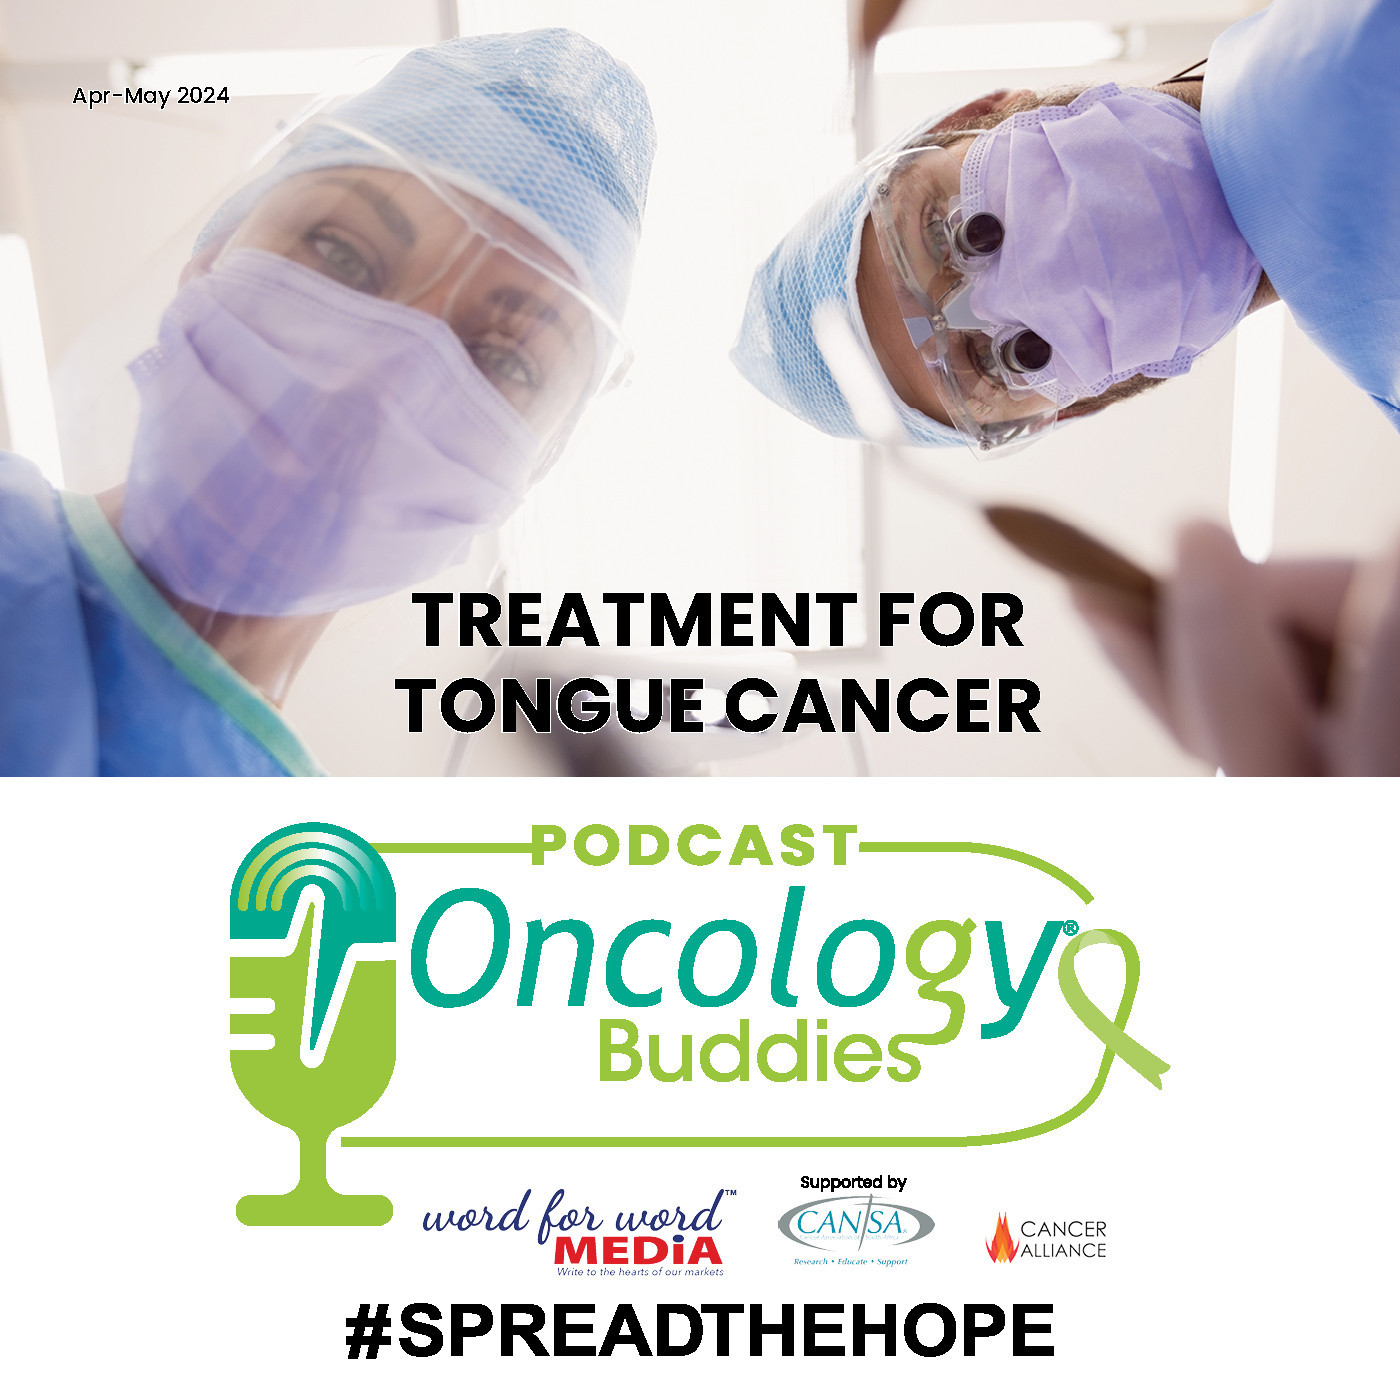 Treatment for tongue cancer